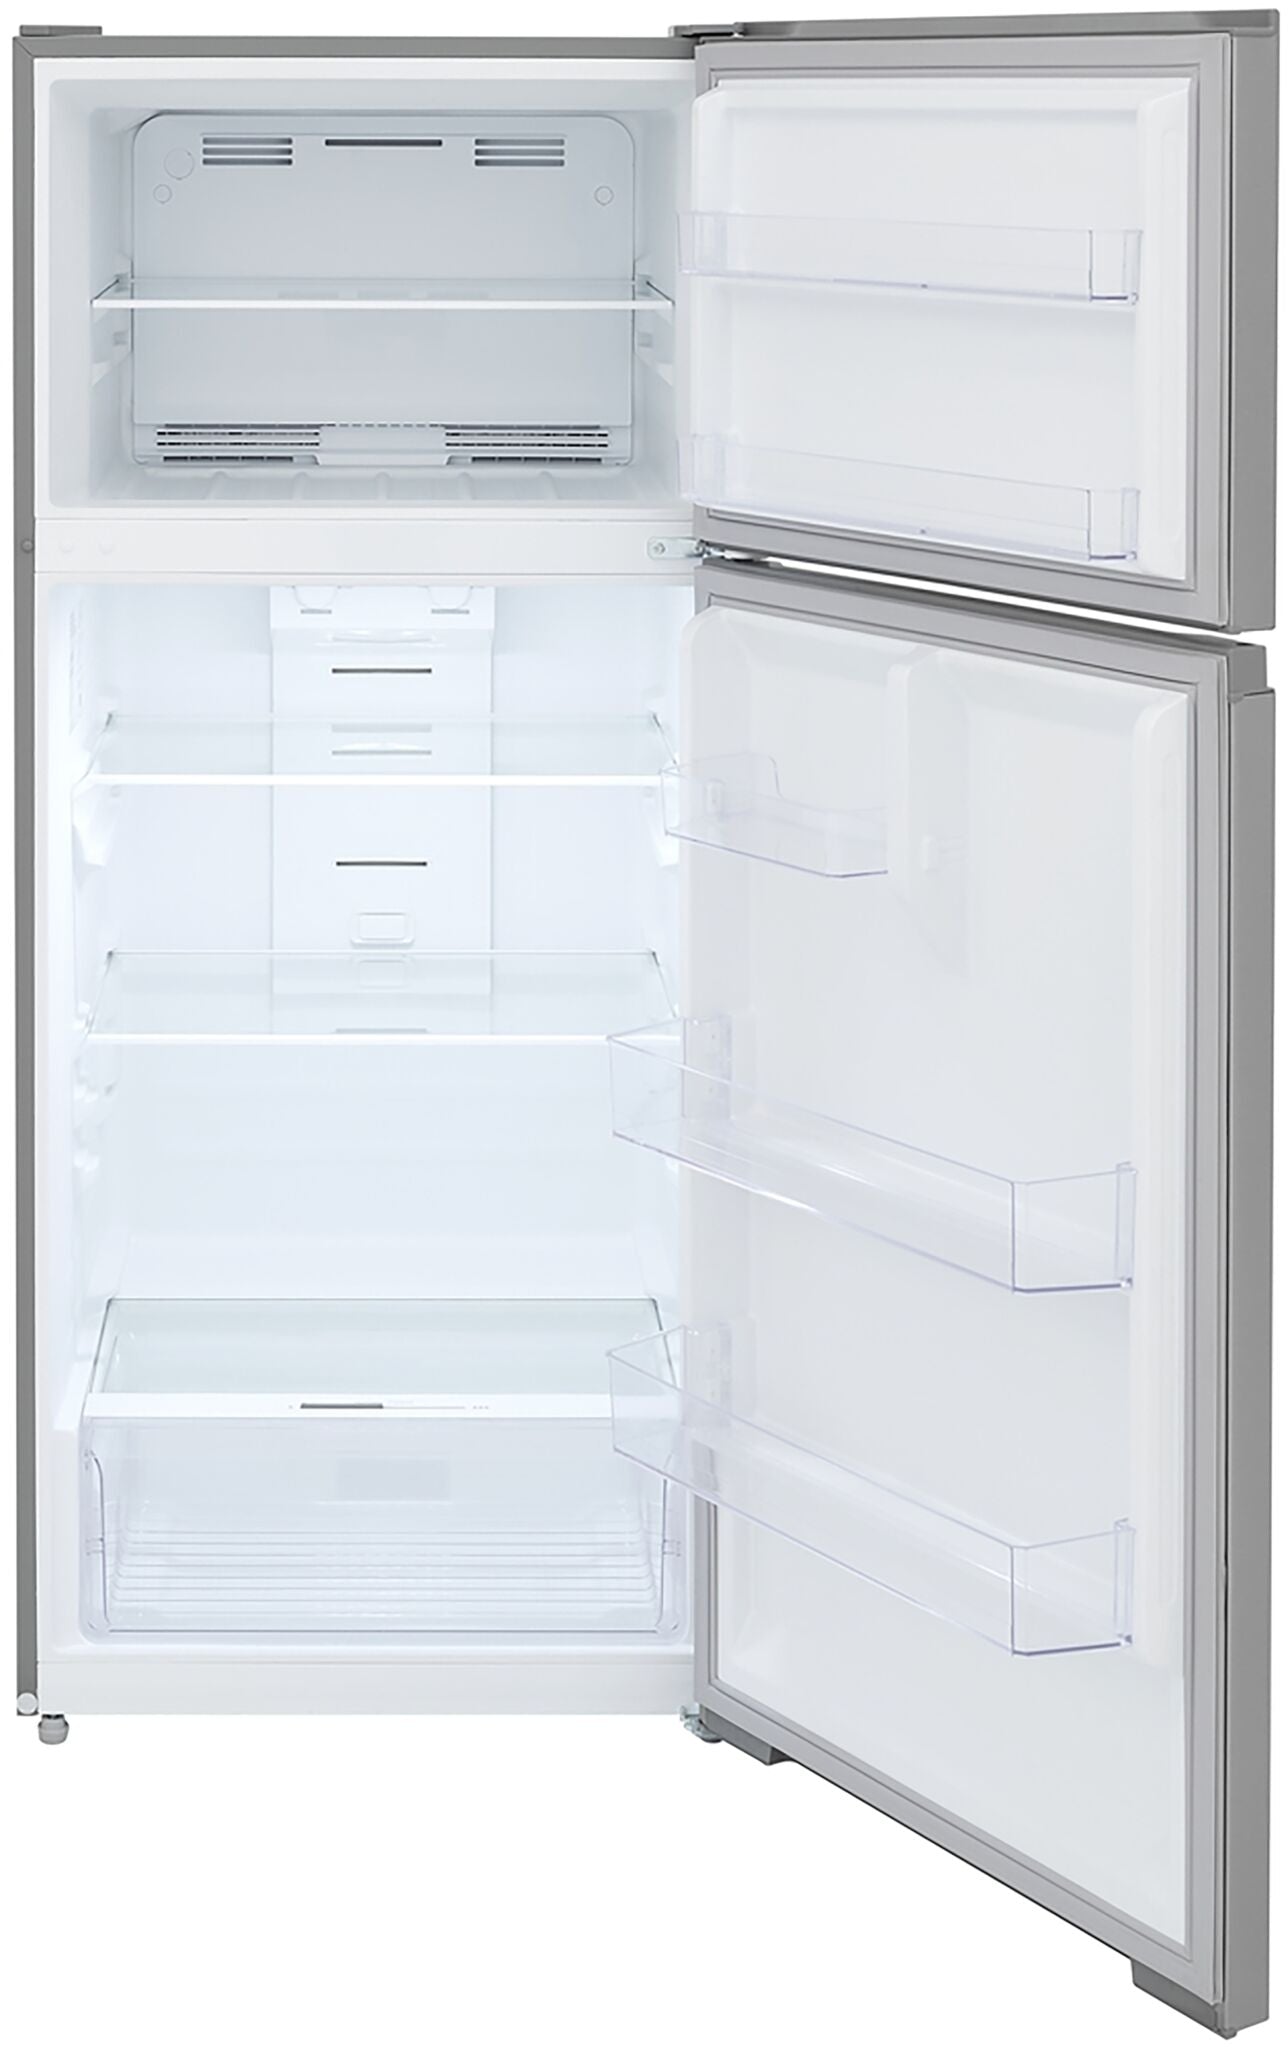 Frigidaire Stainless Steel Top Mount Refrigerator (16.03 Cu. Ft.) - FRTE1622AS